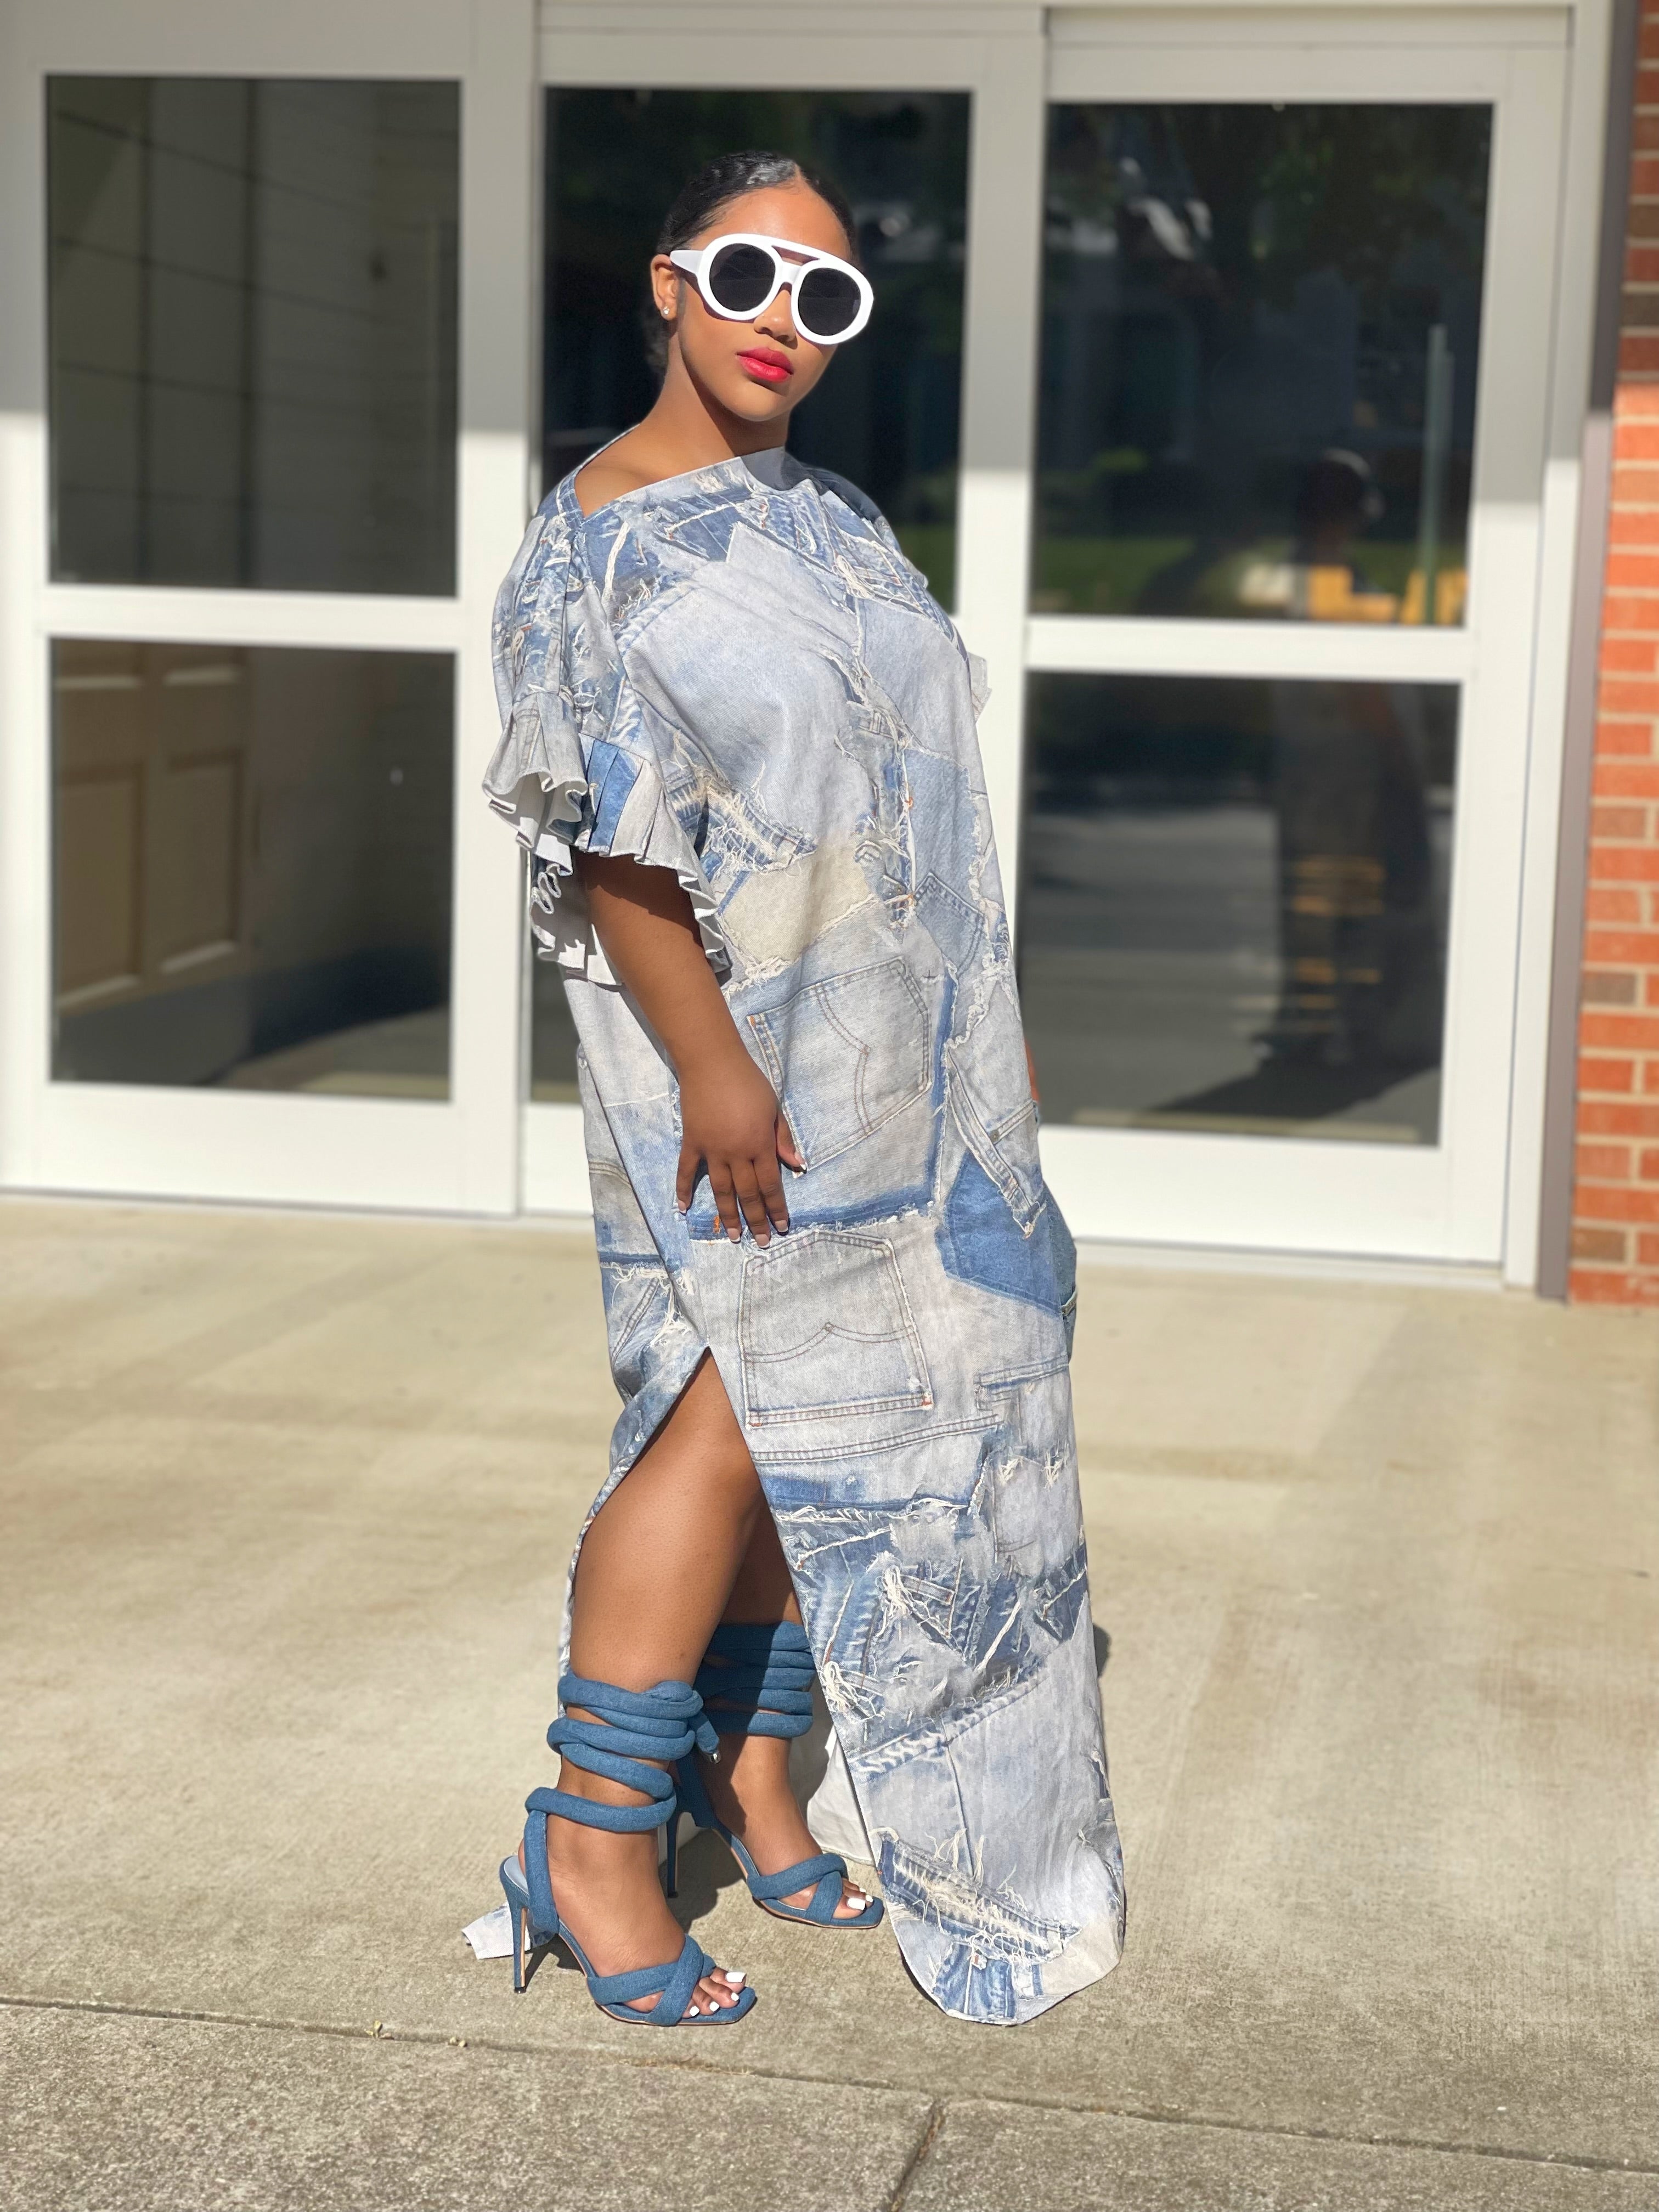 GOLDxTEAL denim printed maxi dress featuring ruffled short sleeves and side slits.